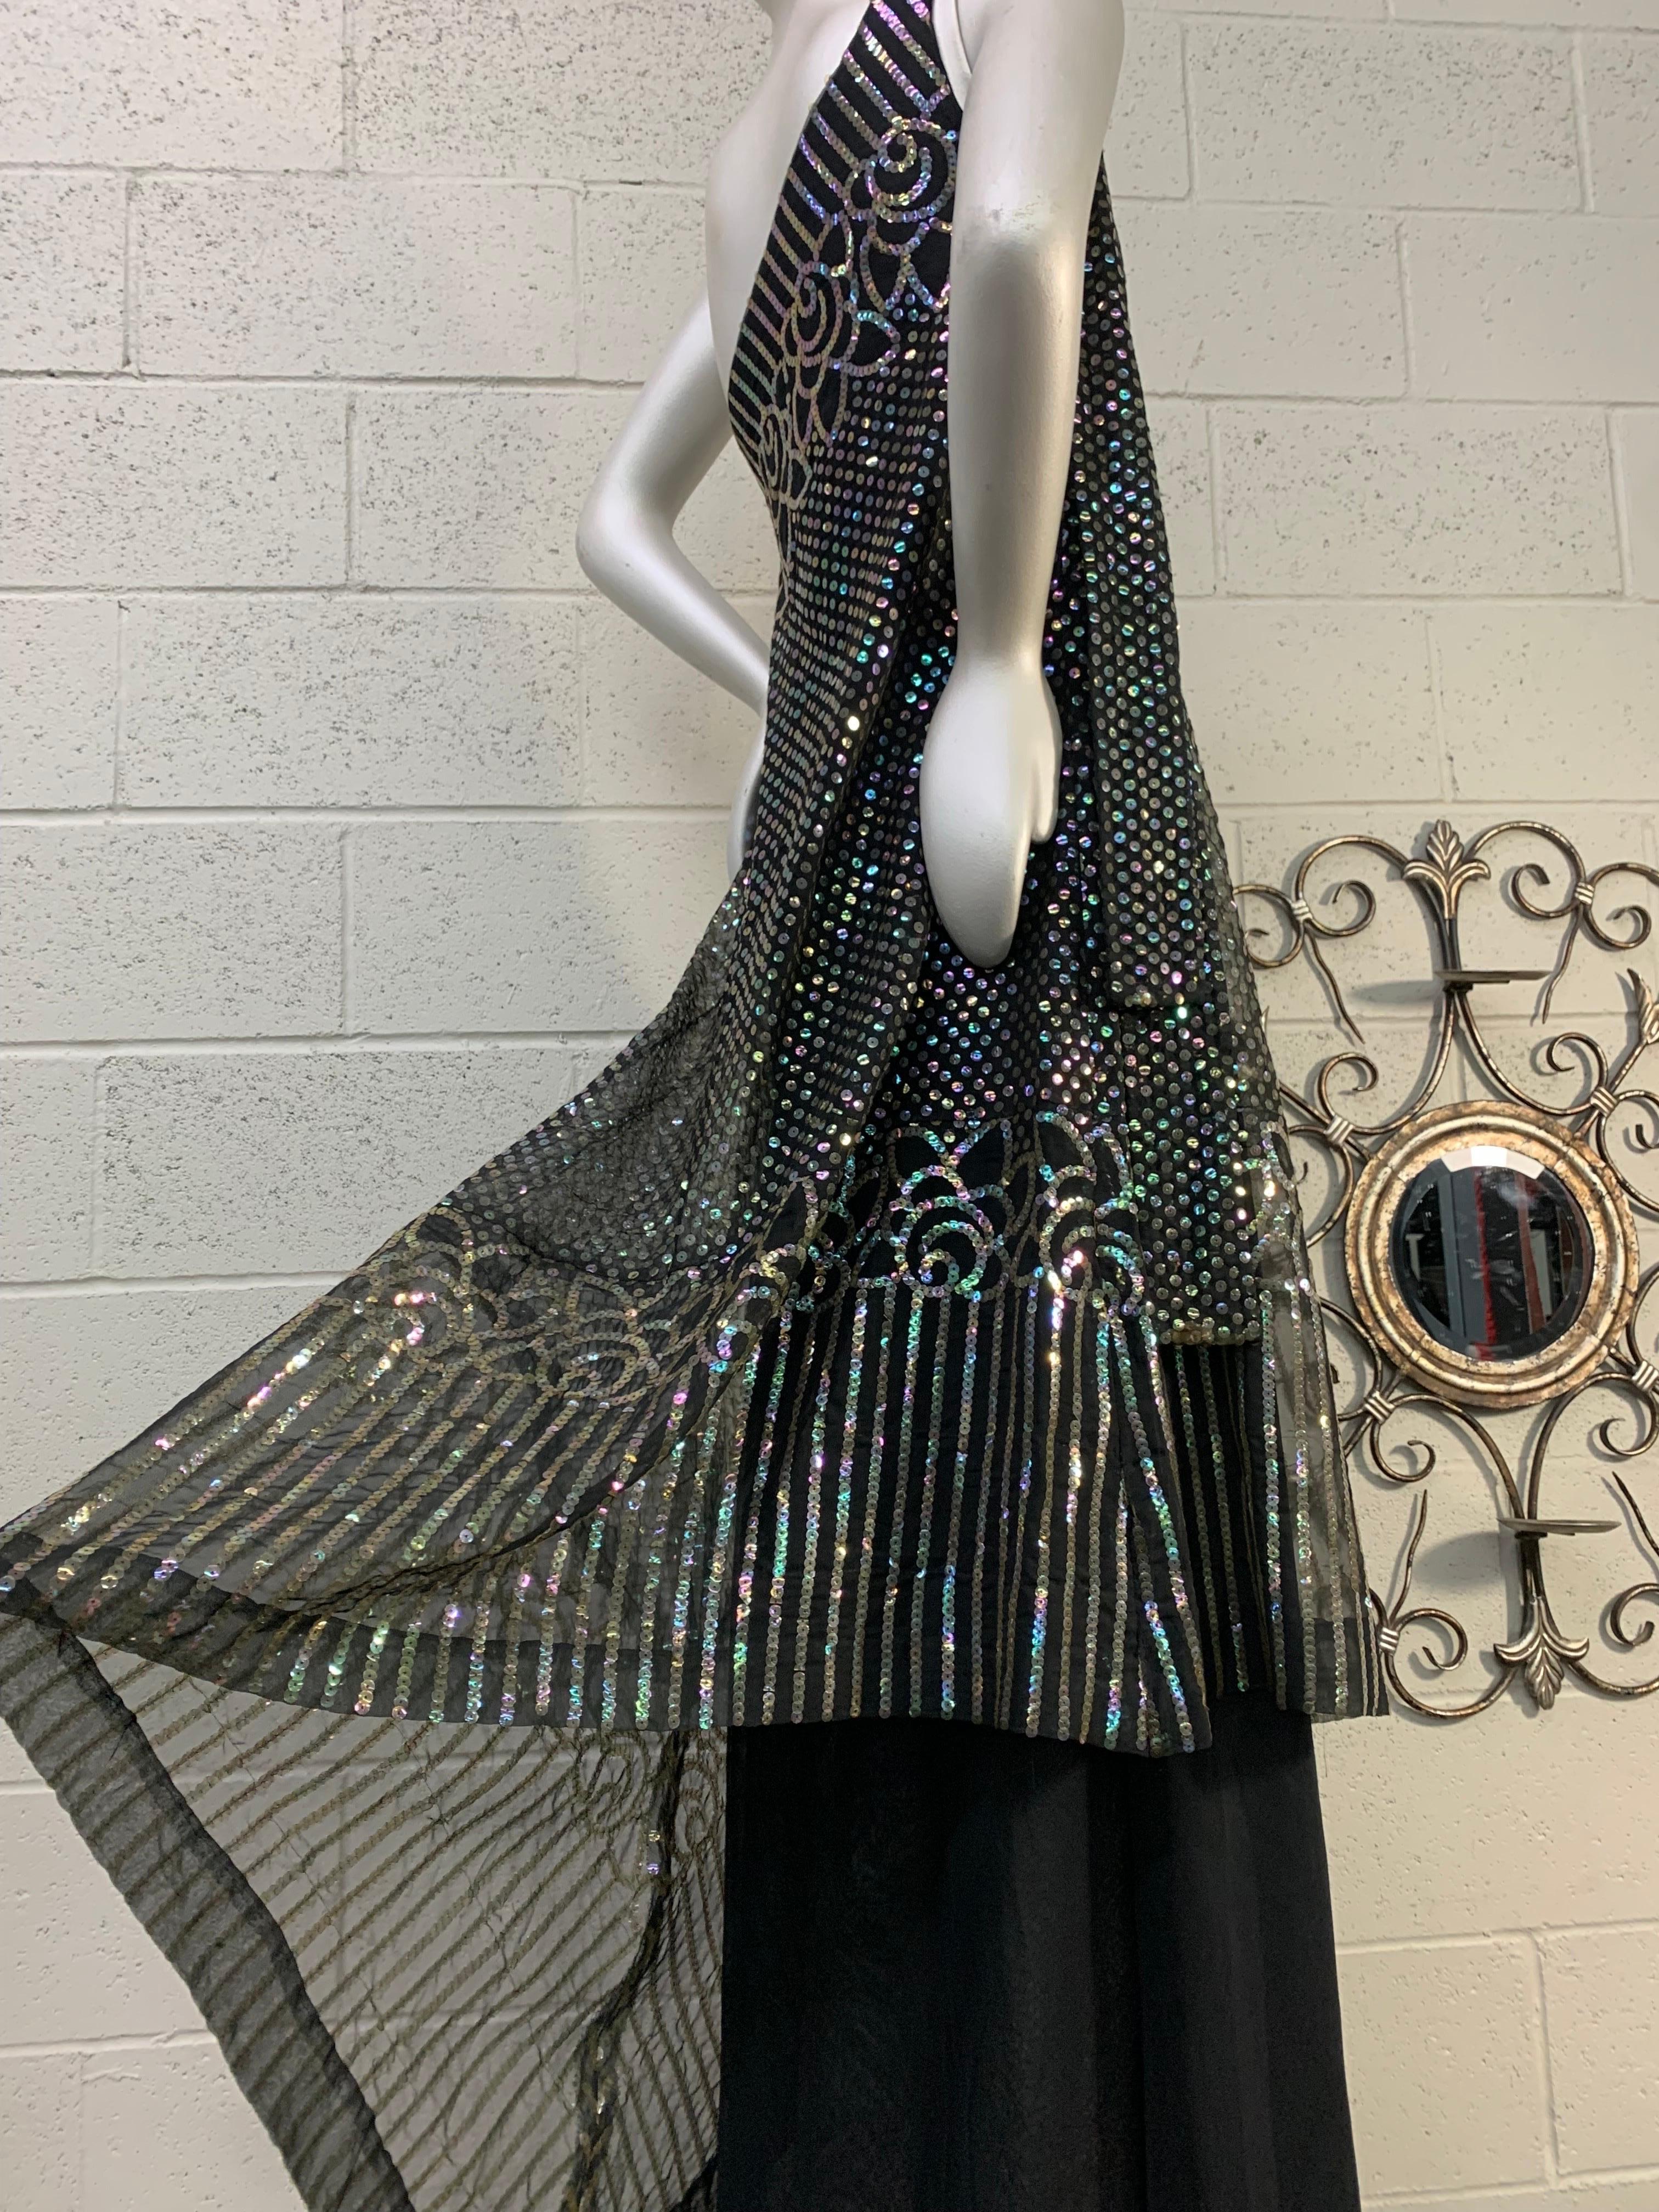 1970 Ruben Panis Black Chiffon Hologram Sequin Art Deco Styled One-Shoulder Gown For Sale 7